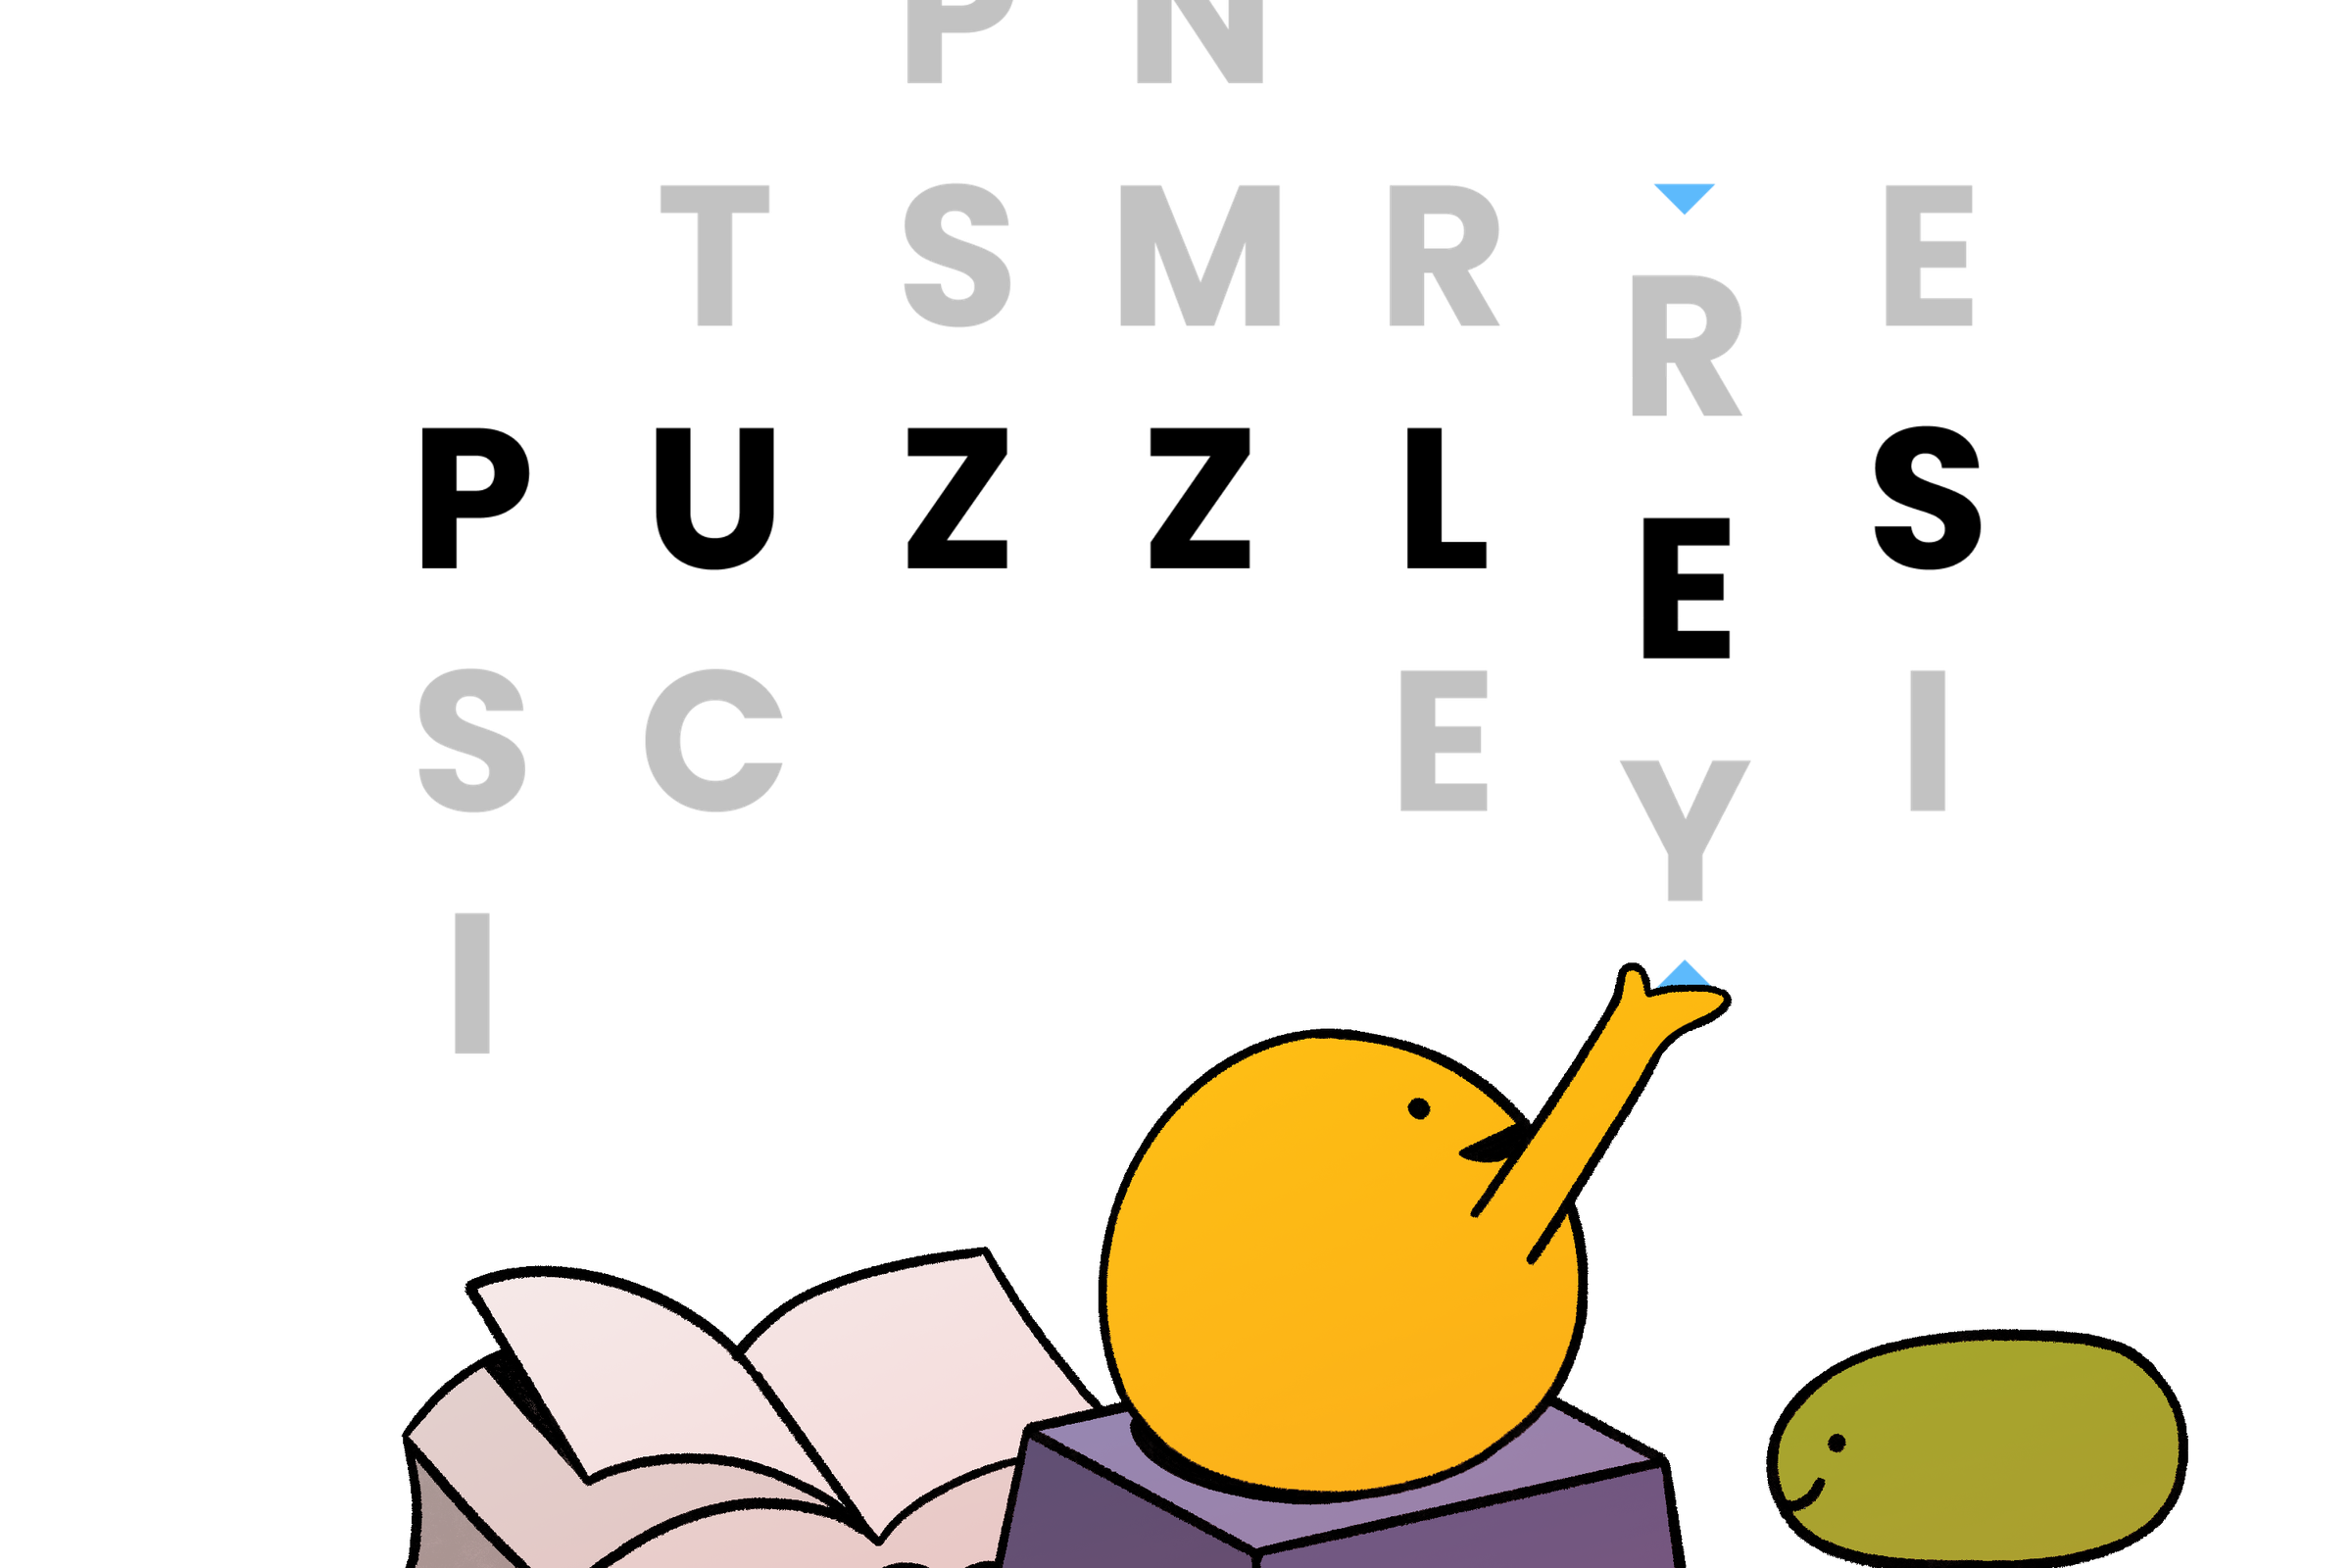 An illustration for the puzzle game site Puzzmo.